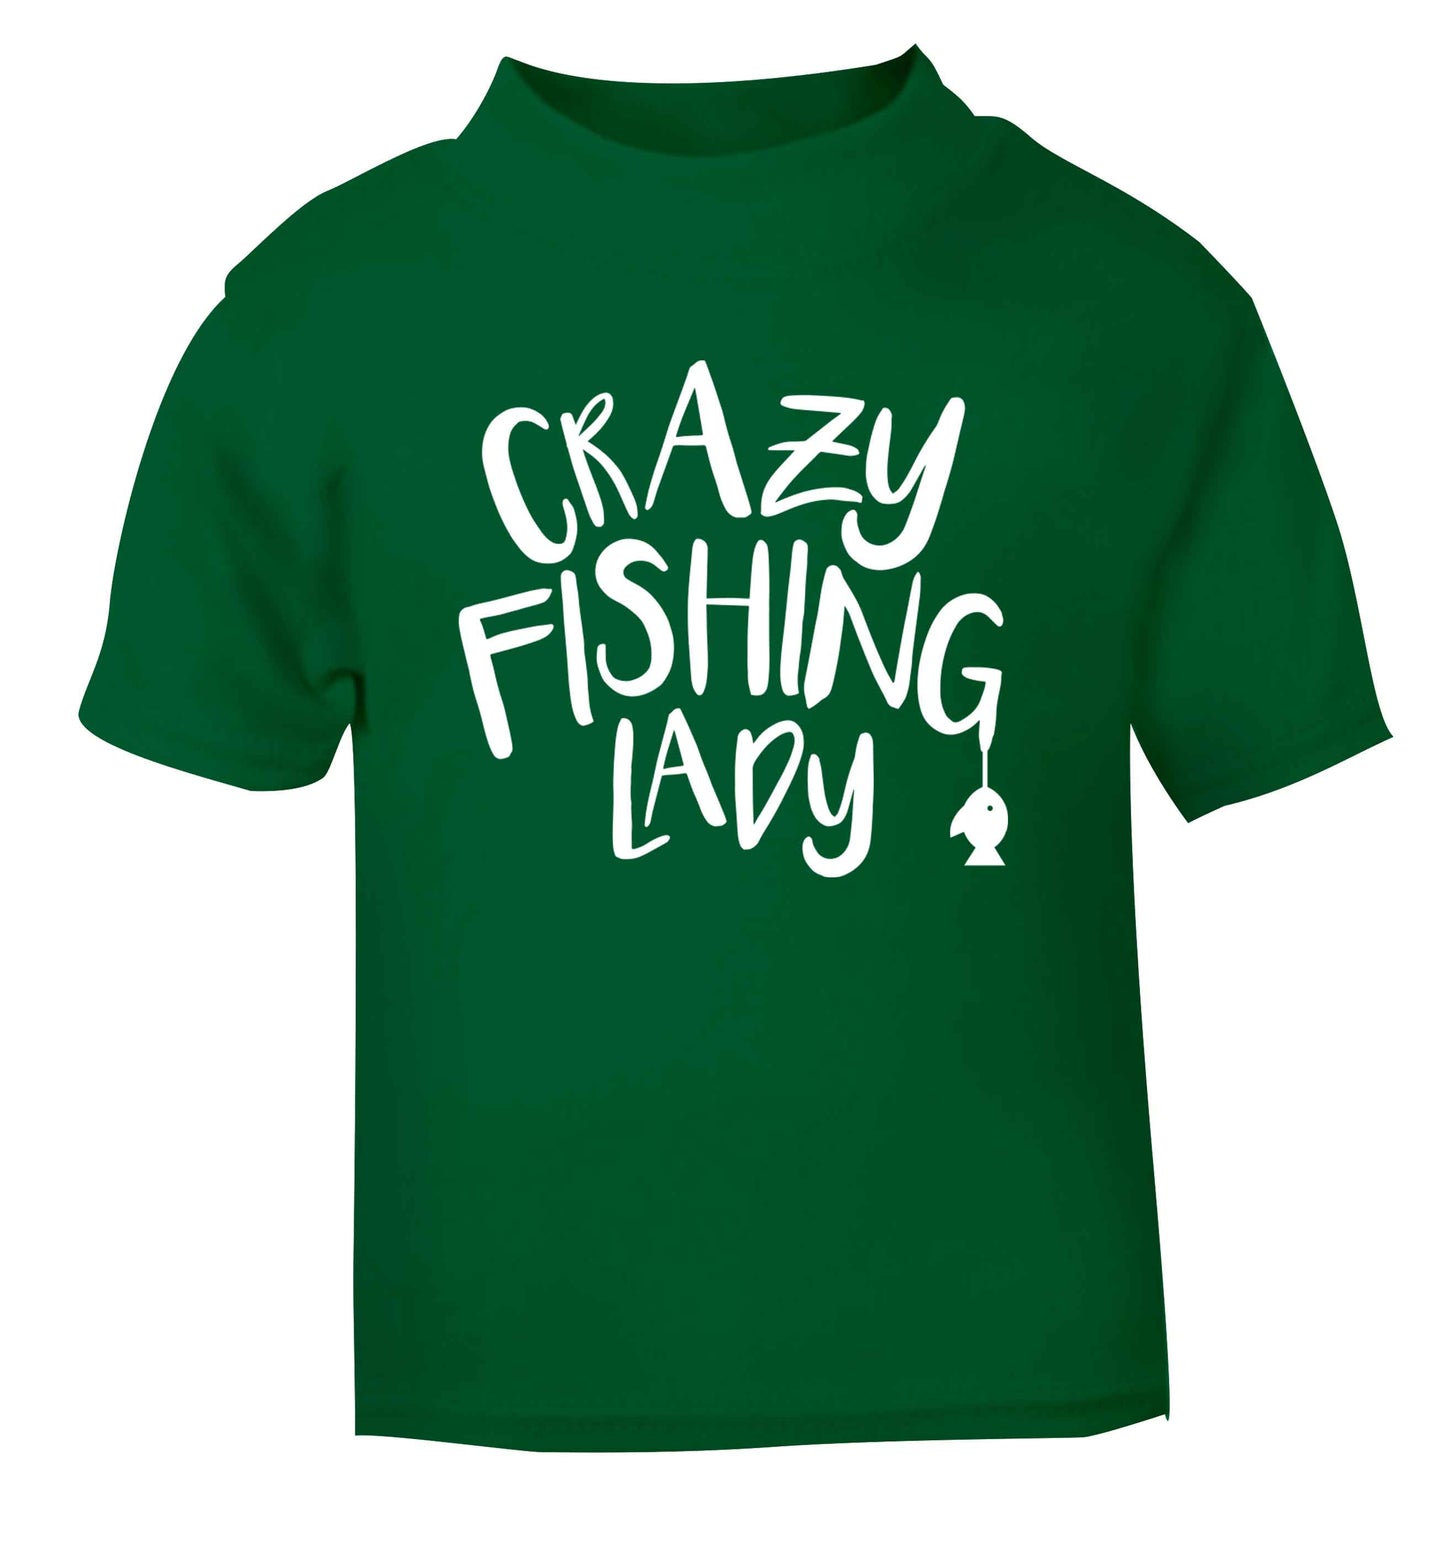 Crazy fishing lady green Baby Toddler Tshirt 2 Years